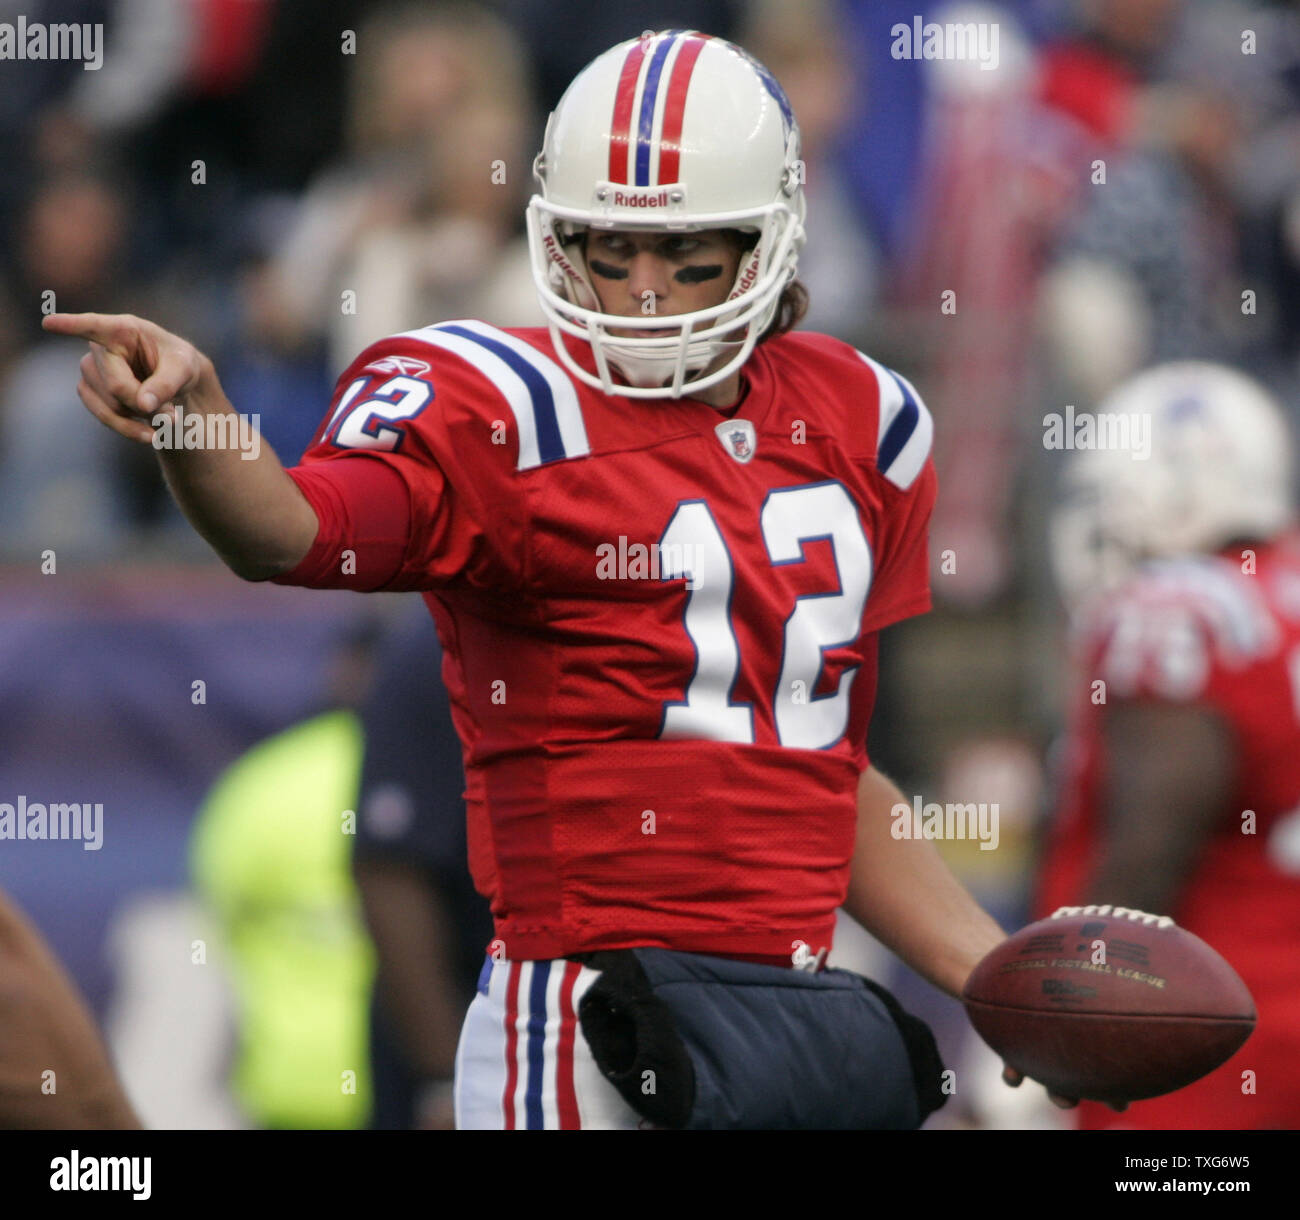 New England Patriots quarterback Tom Brady points to a teammate while running plays before the game against the Minnesota Vikings at Gillette Stadium in Foxboro, Massachusetts on October 31, 2010.  UPI/Matthew Healey Stock Photo